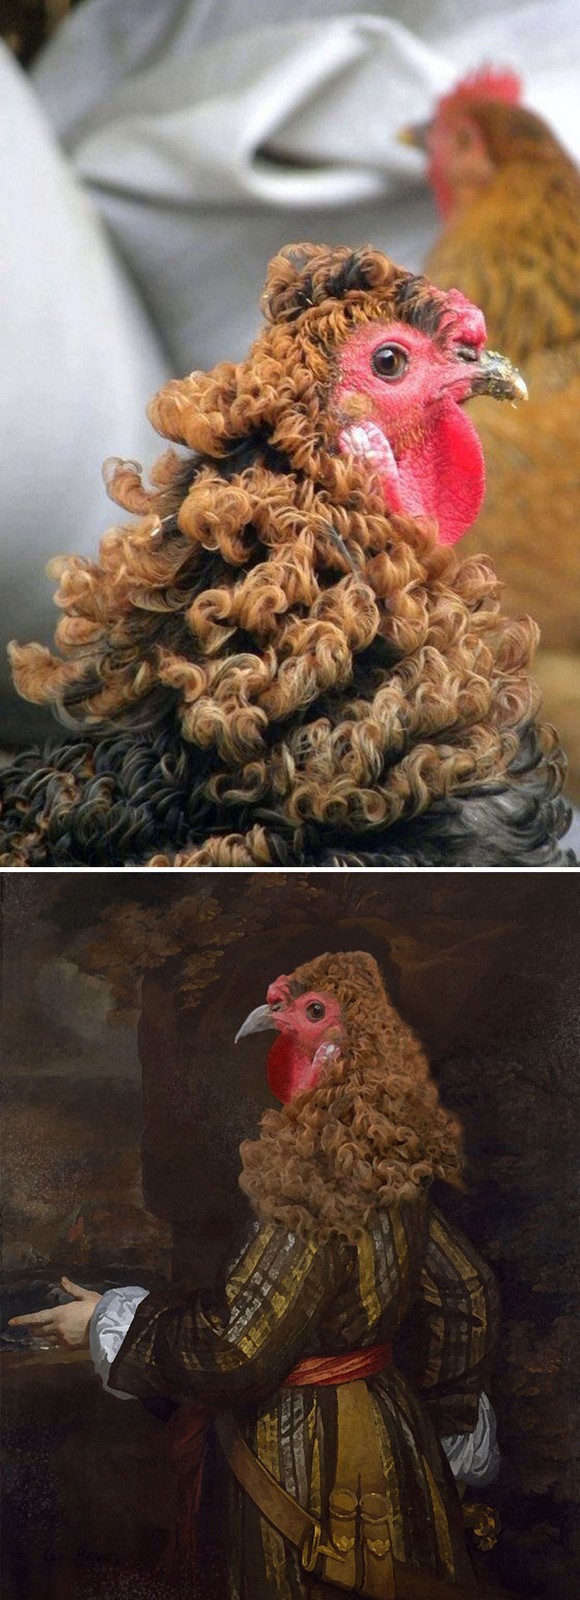 11 Epic Photoshop Battles - This chicken with curly feathers.